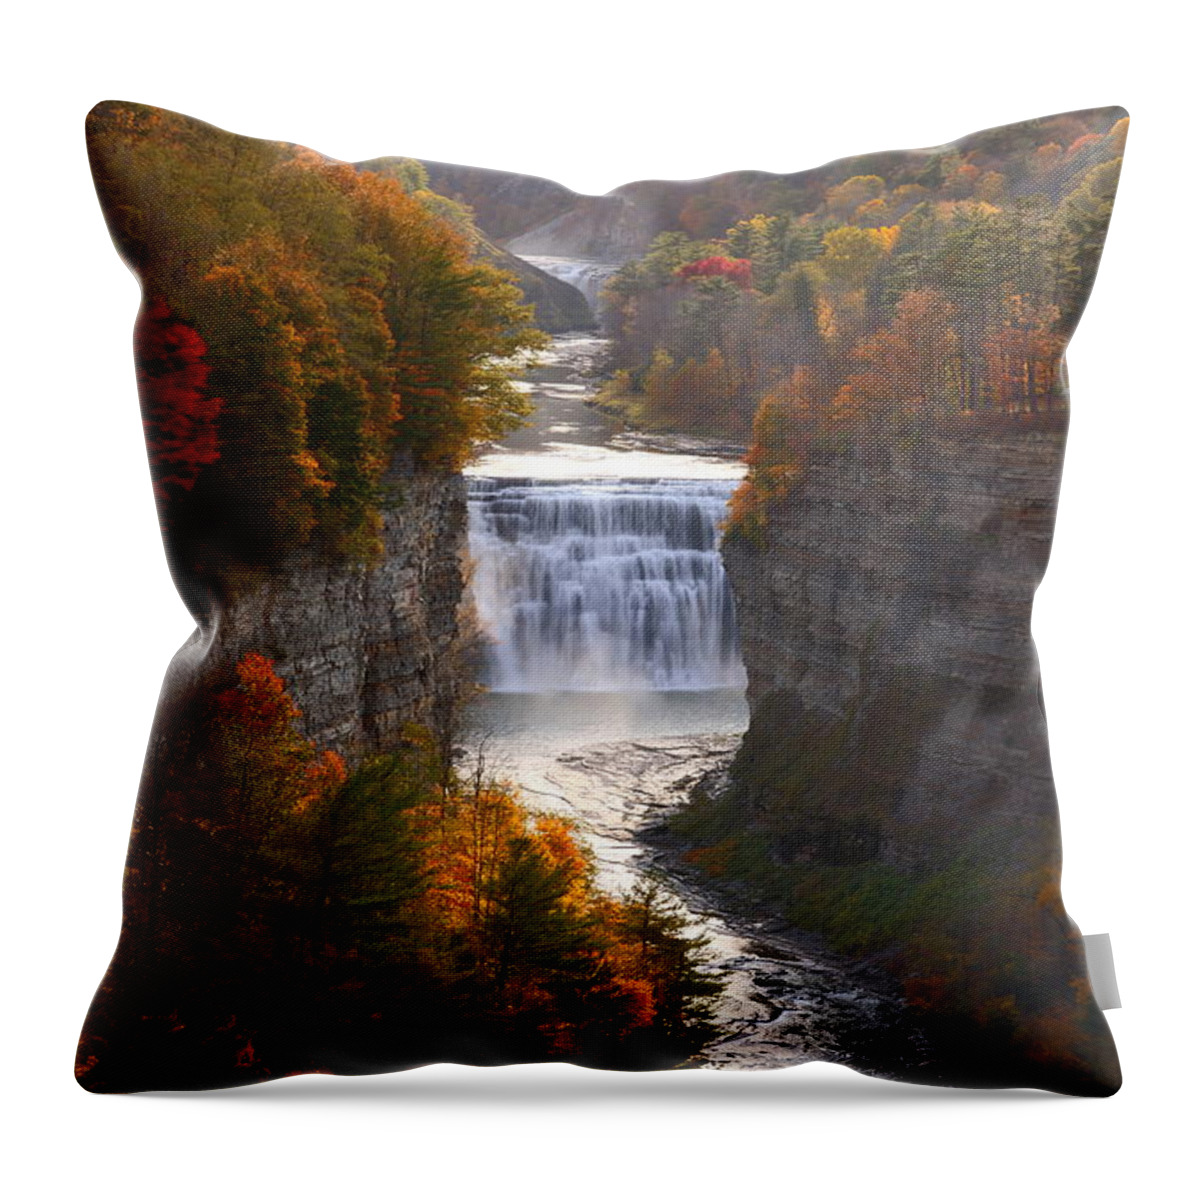 Middle Falls Throw Pillow featuring the photograph The Middle Falls of Letchworth State Park by Tony Lee